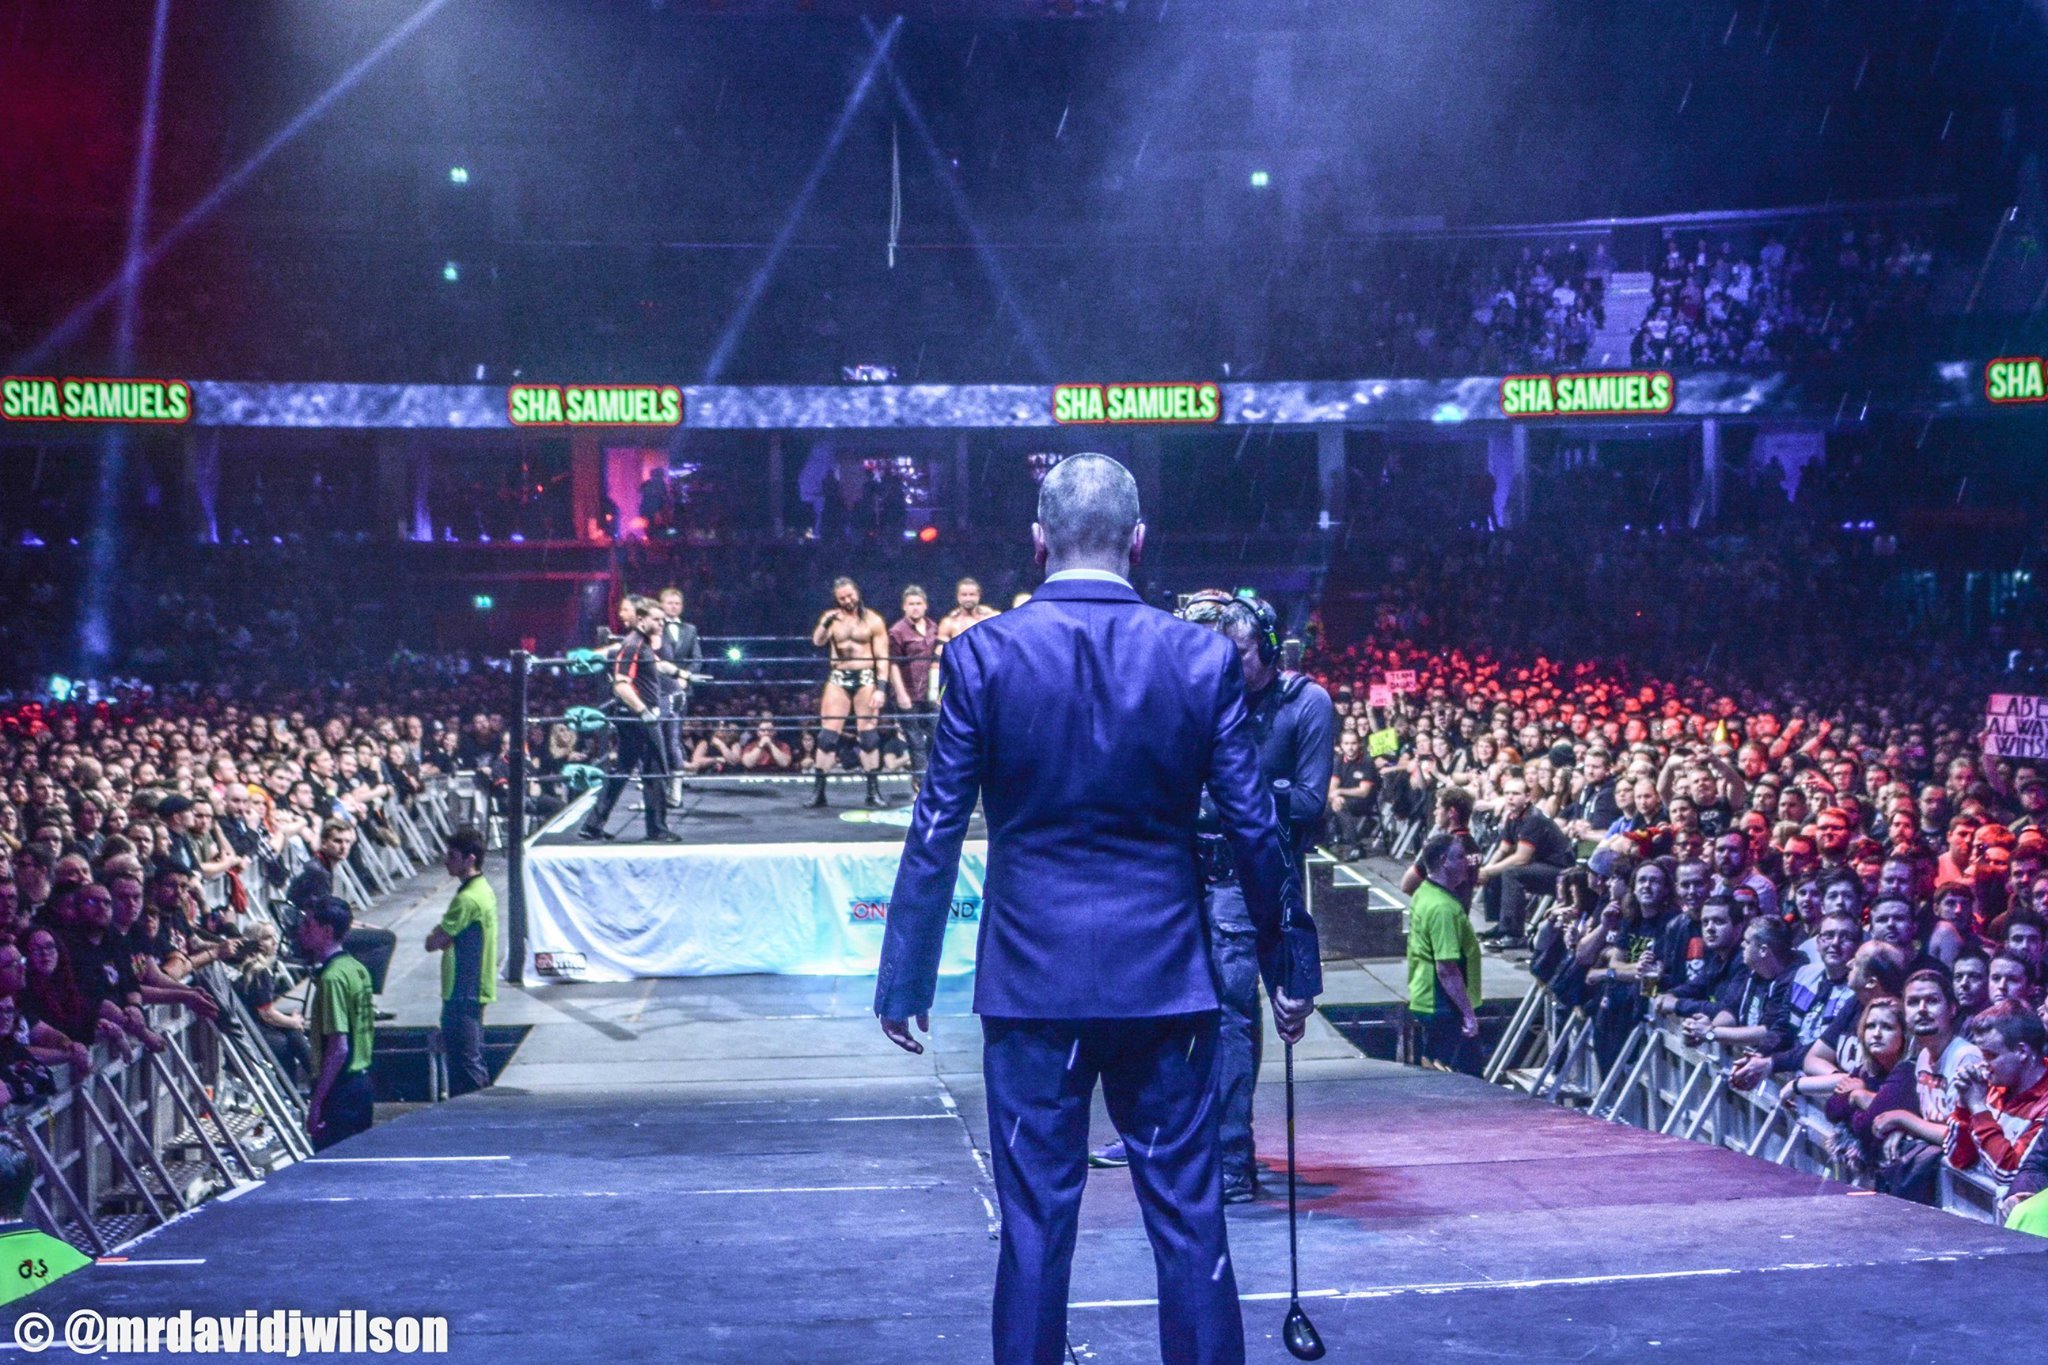 ICW owner Mark Dallas faces The Hydro crowd (David J. Wilson / ICW)